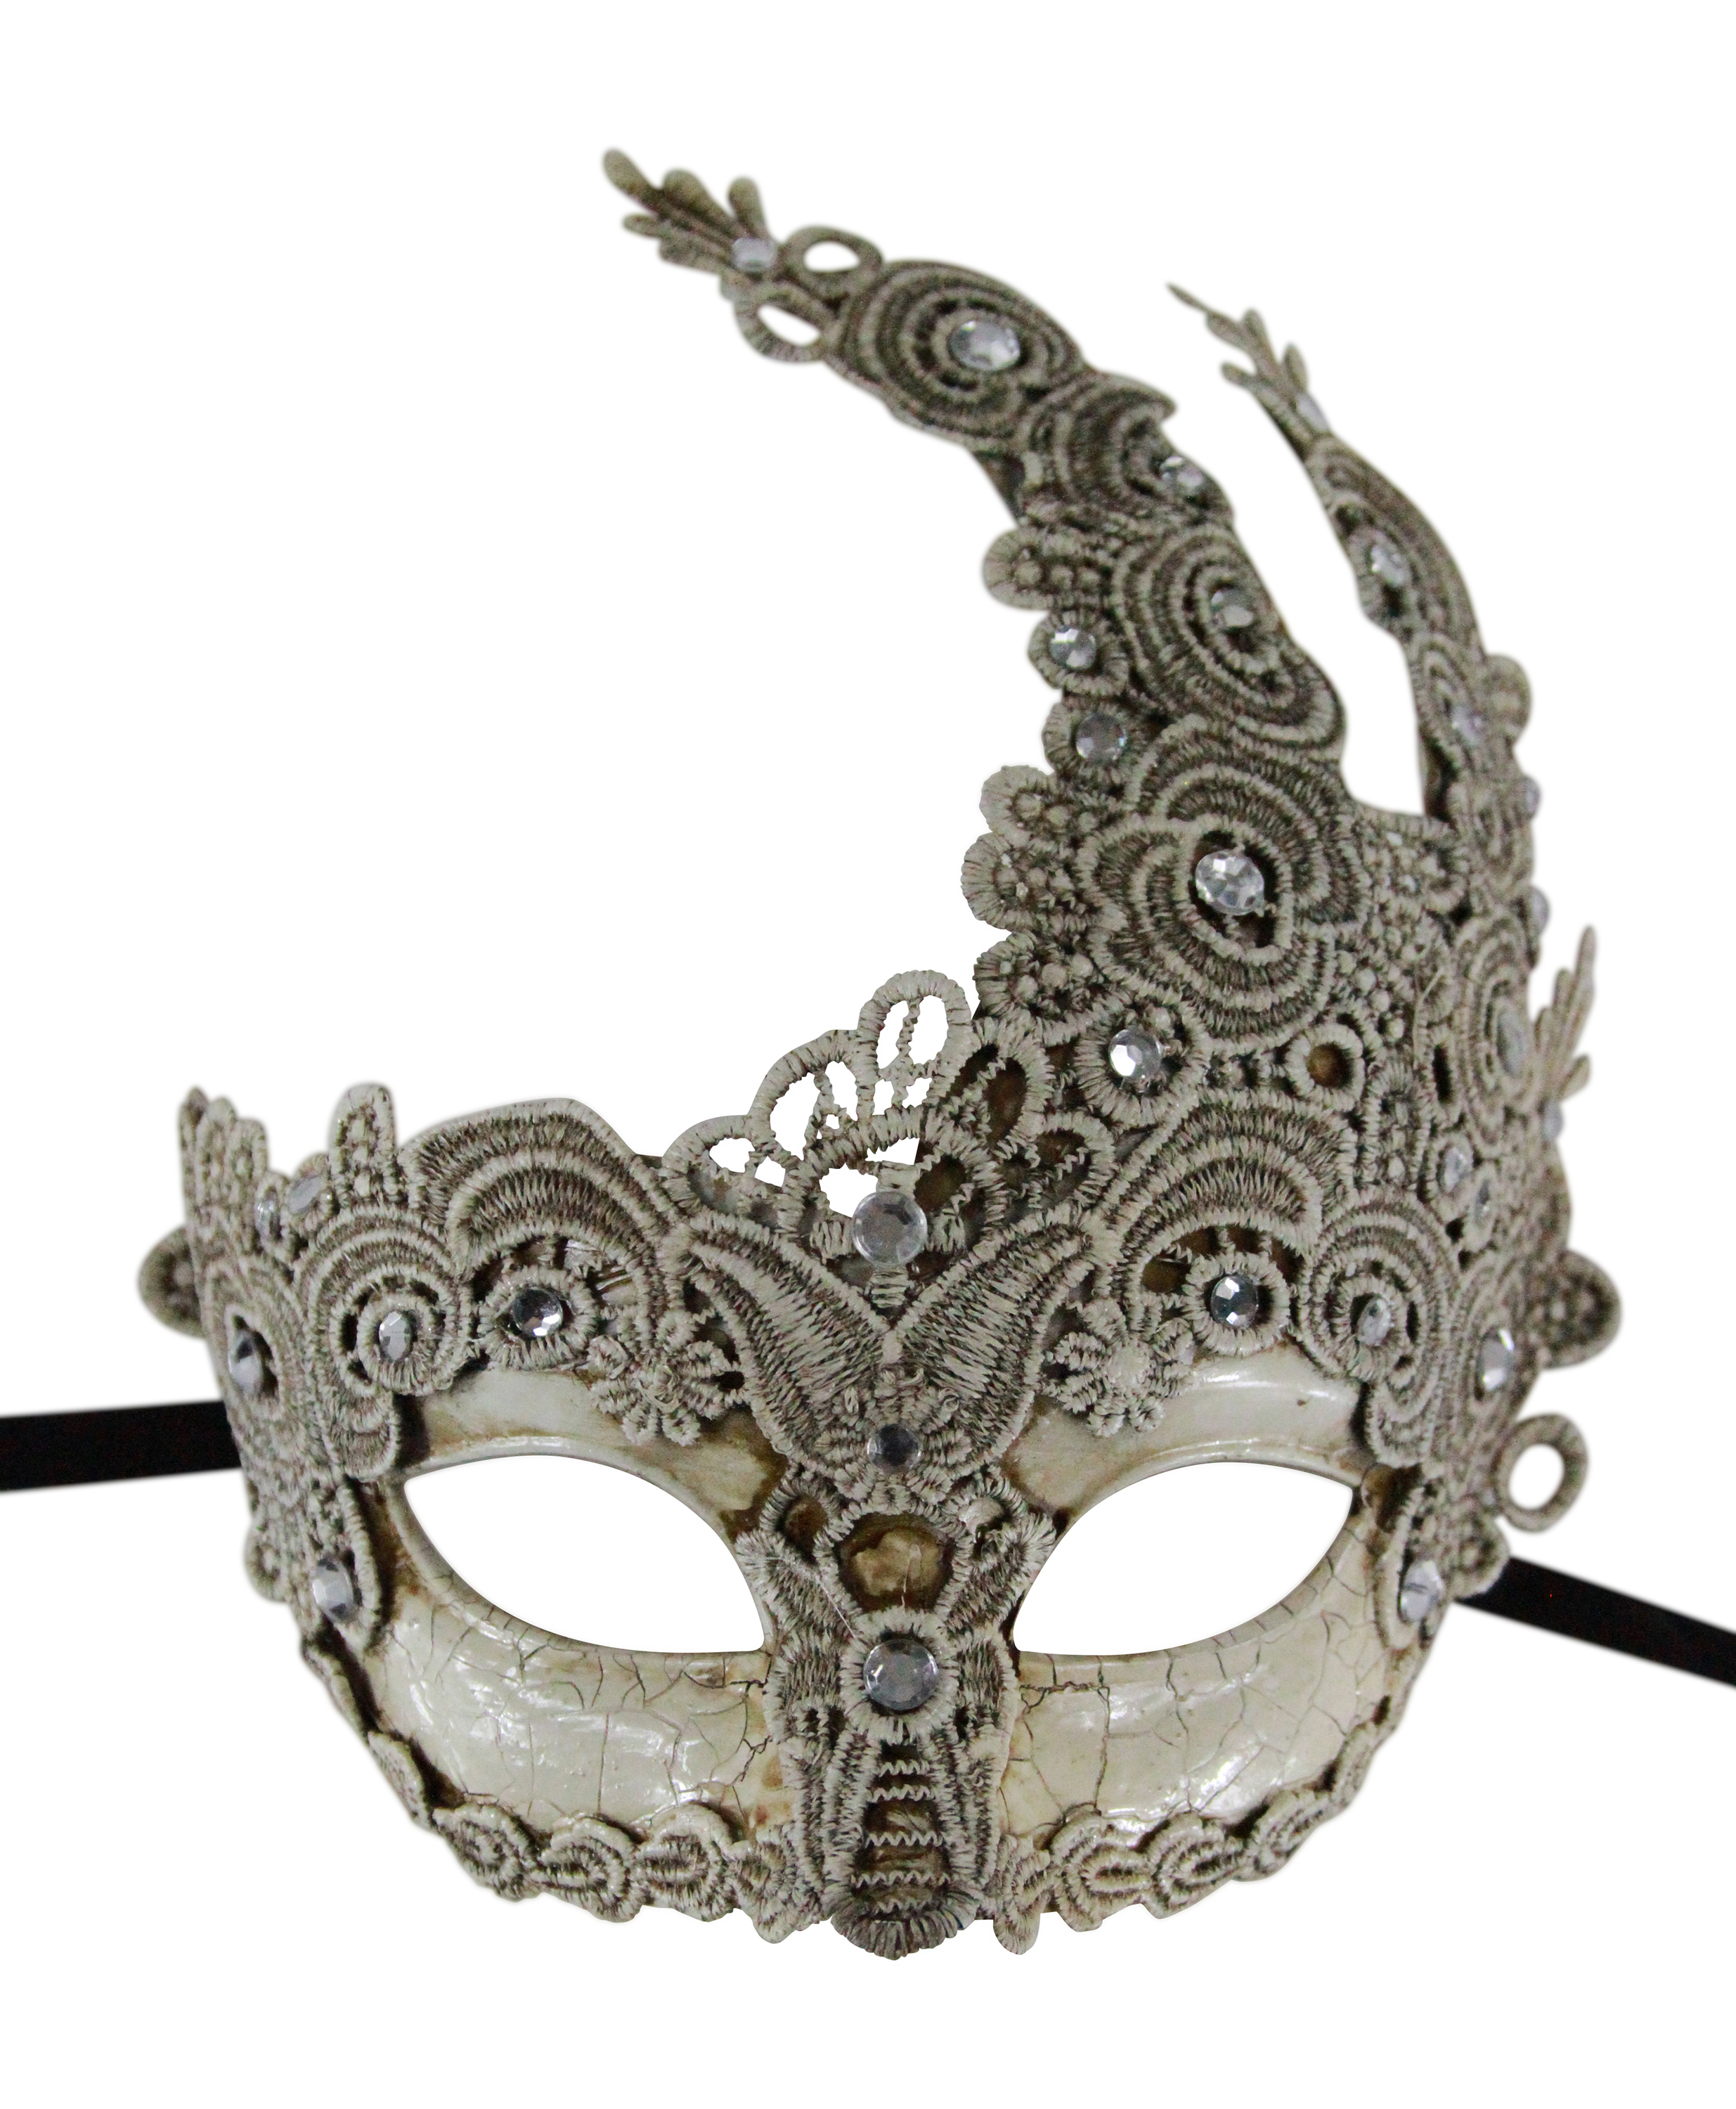 Kayso Lm006d Vintage Beige Gold Lace Mask With Plastic Underlining